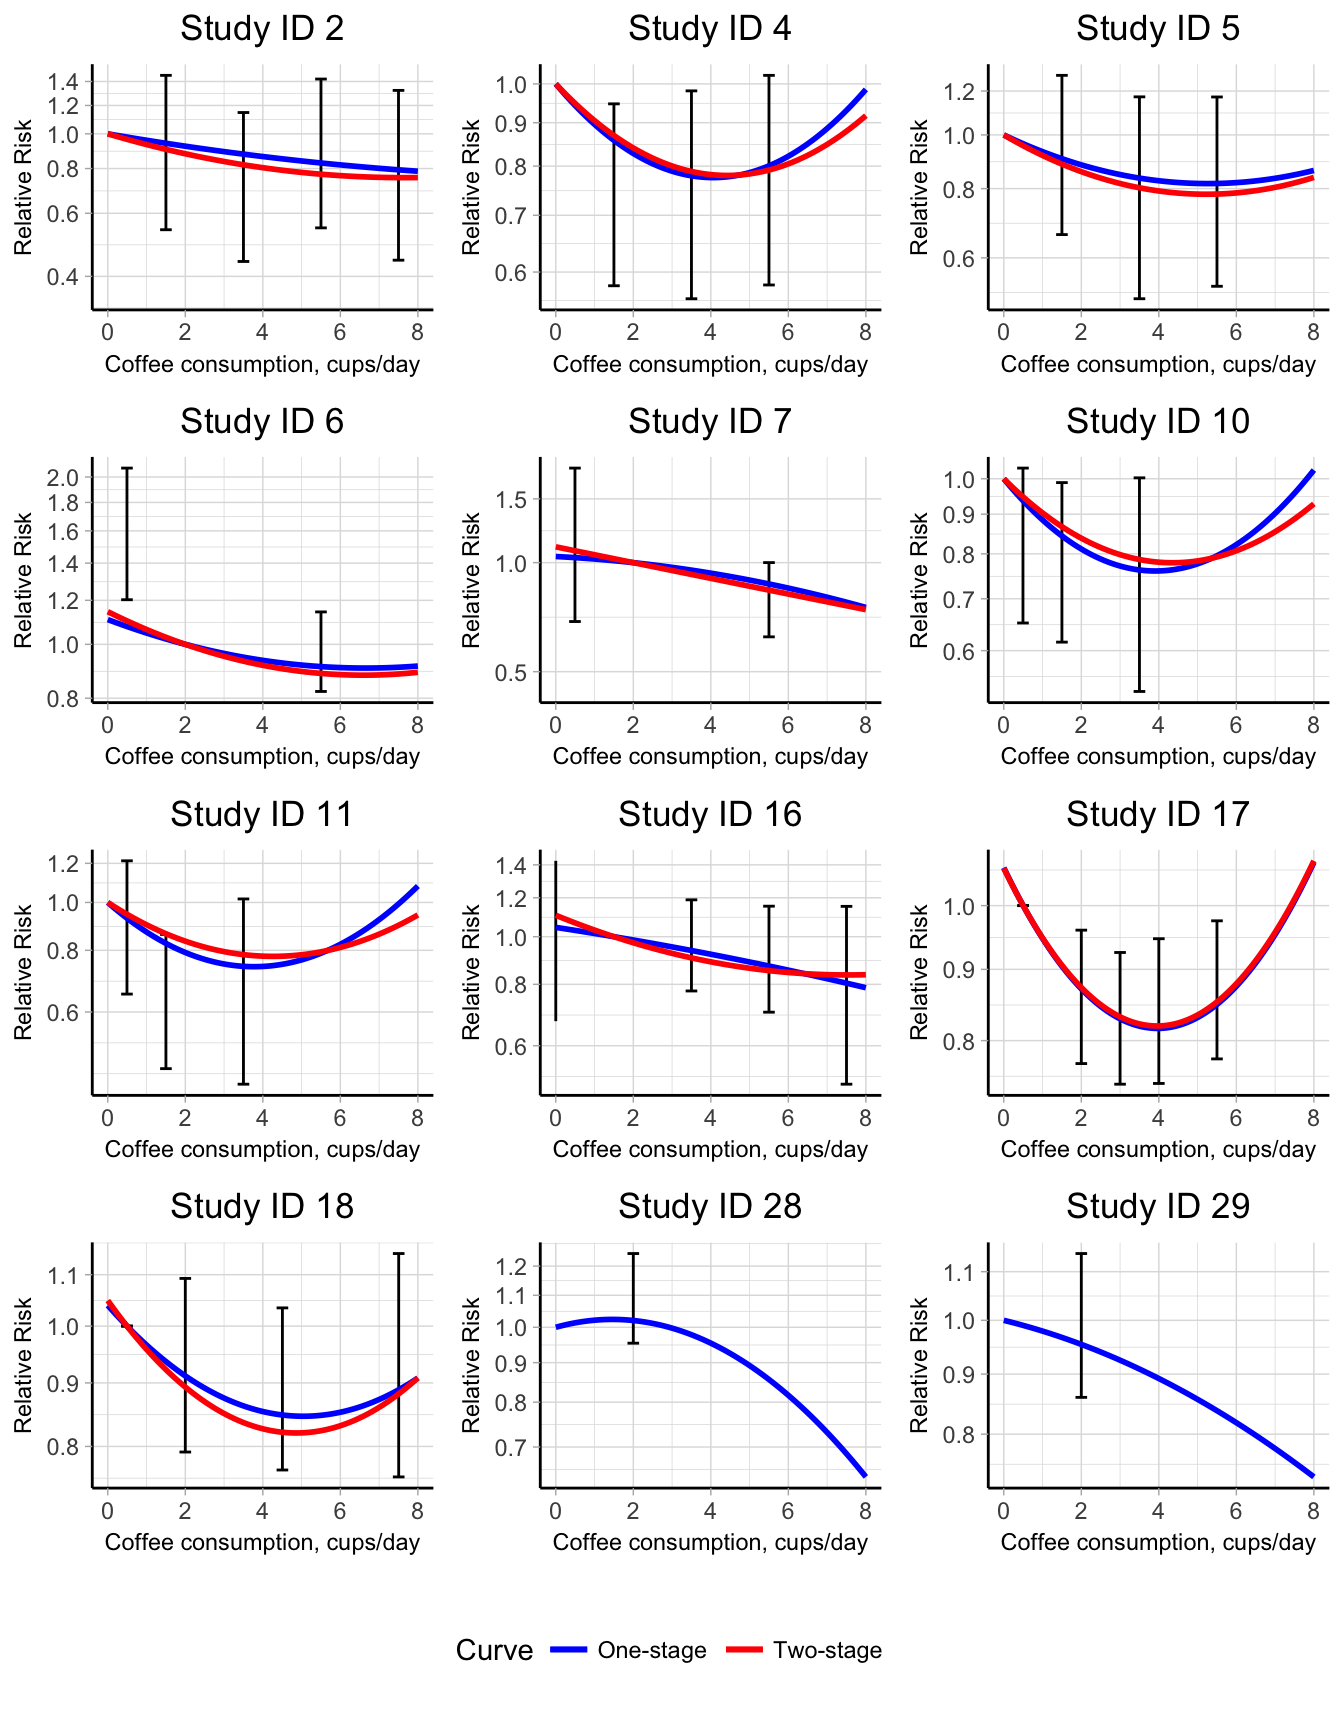 Conditional predicted quadratic curves for the association between coffee consumption and all-cause mortality in a one-stage (blue lines) and two-stage (red lines) approach. The relative risks are presented on the log scale using the study-specific reference categories as comparators.